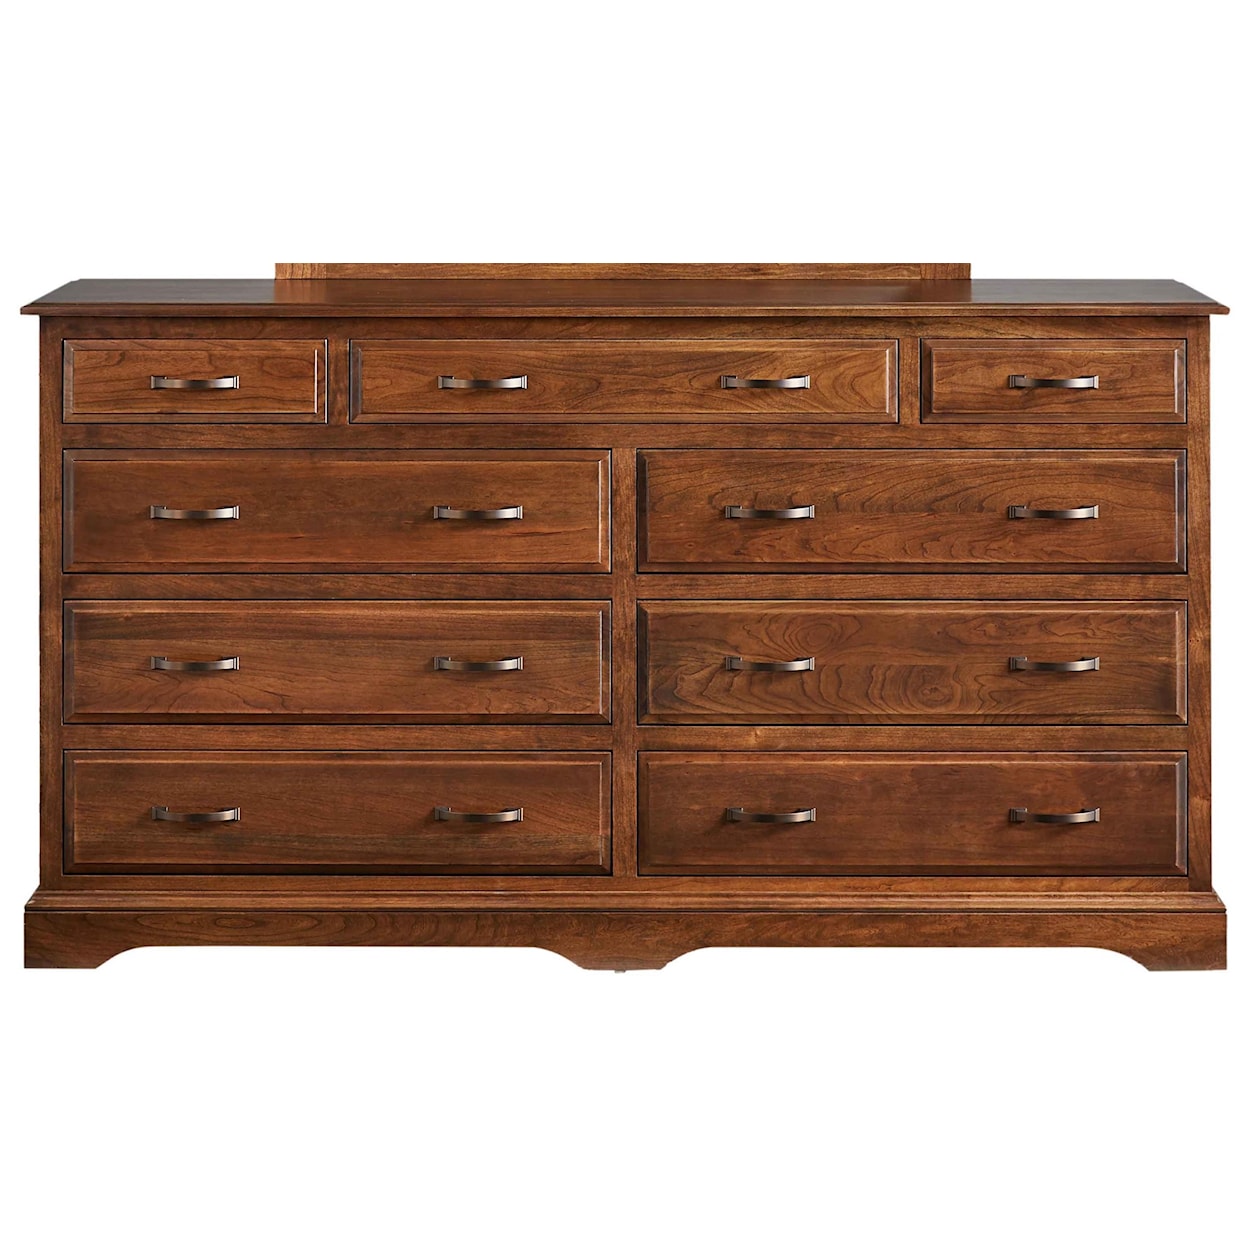 Daniels Amish Carriage Double Dresser